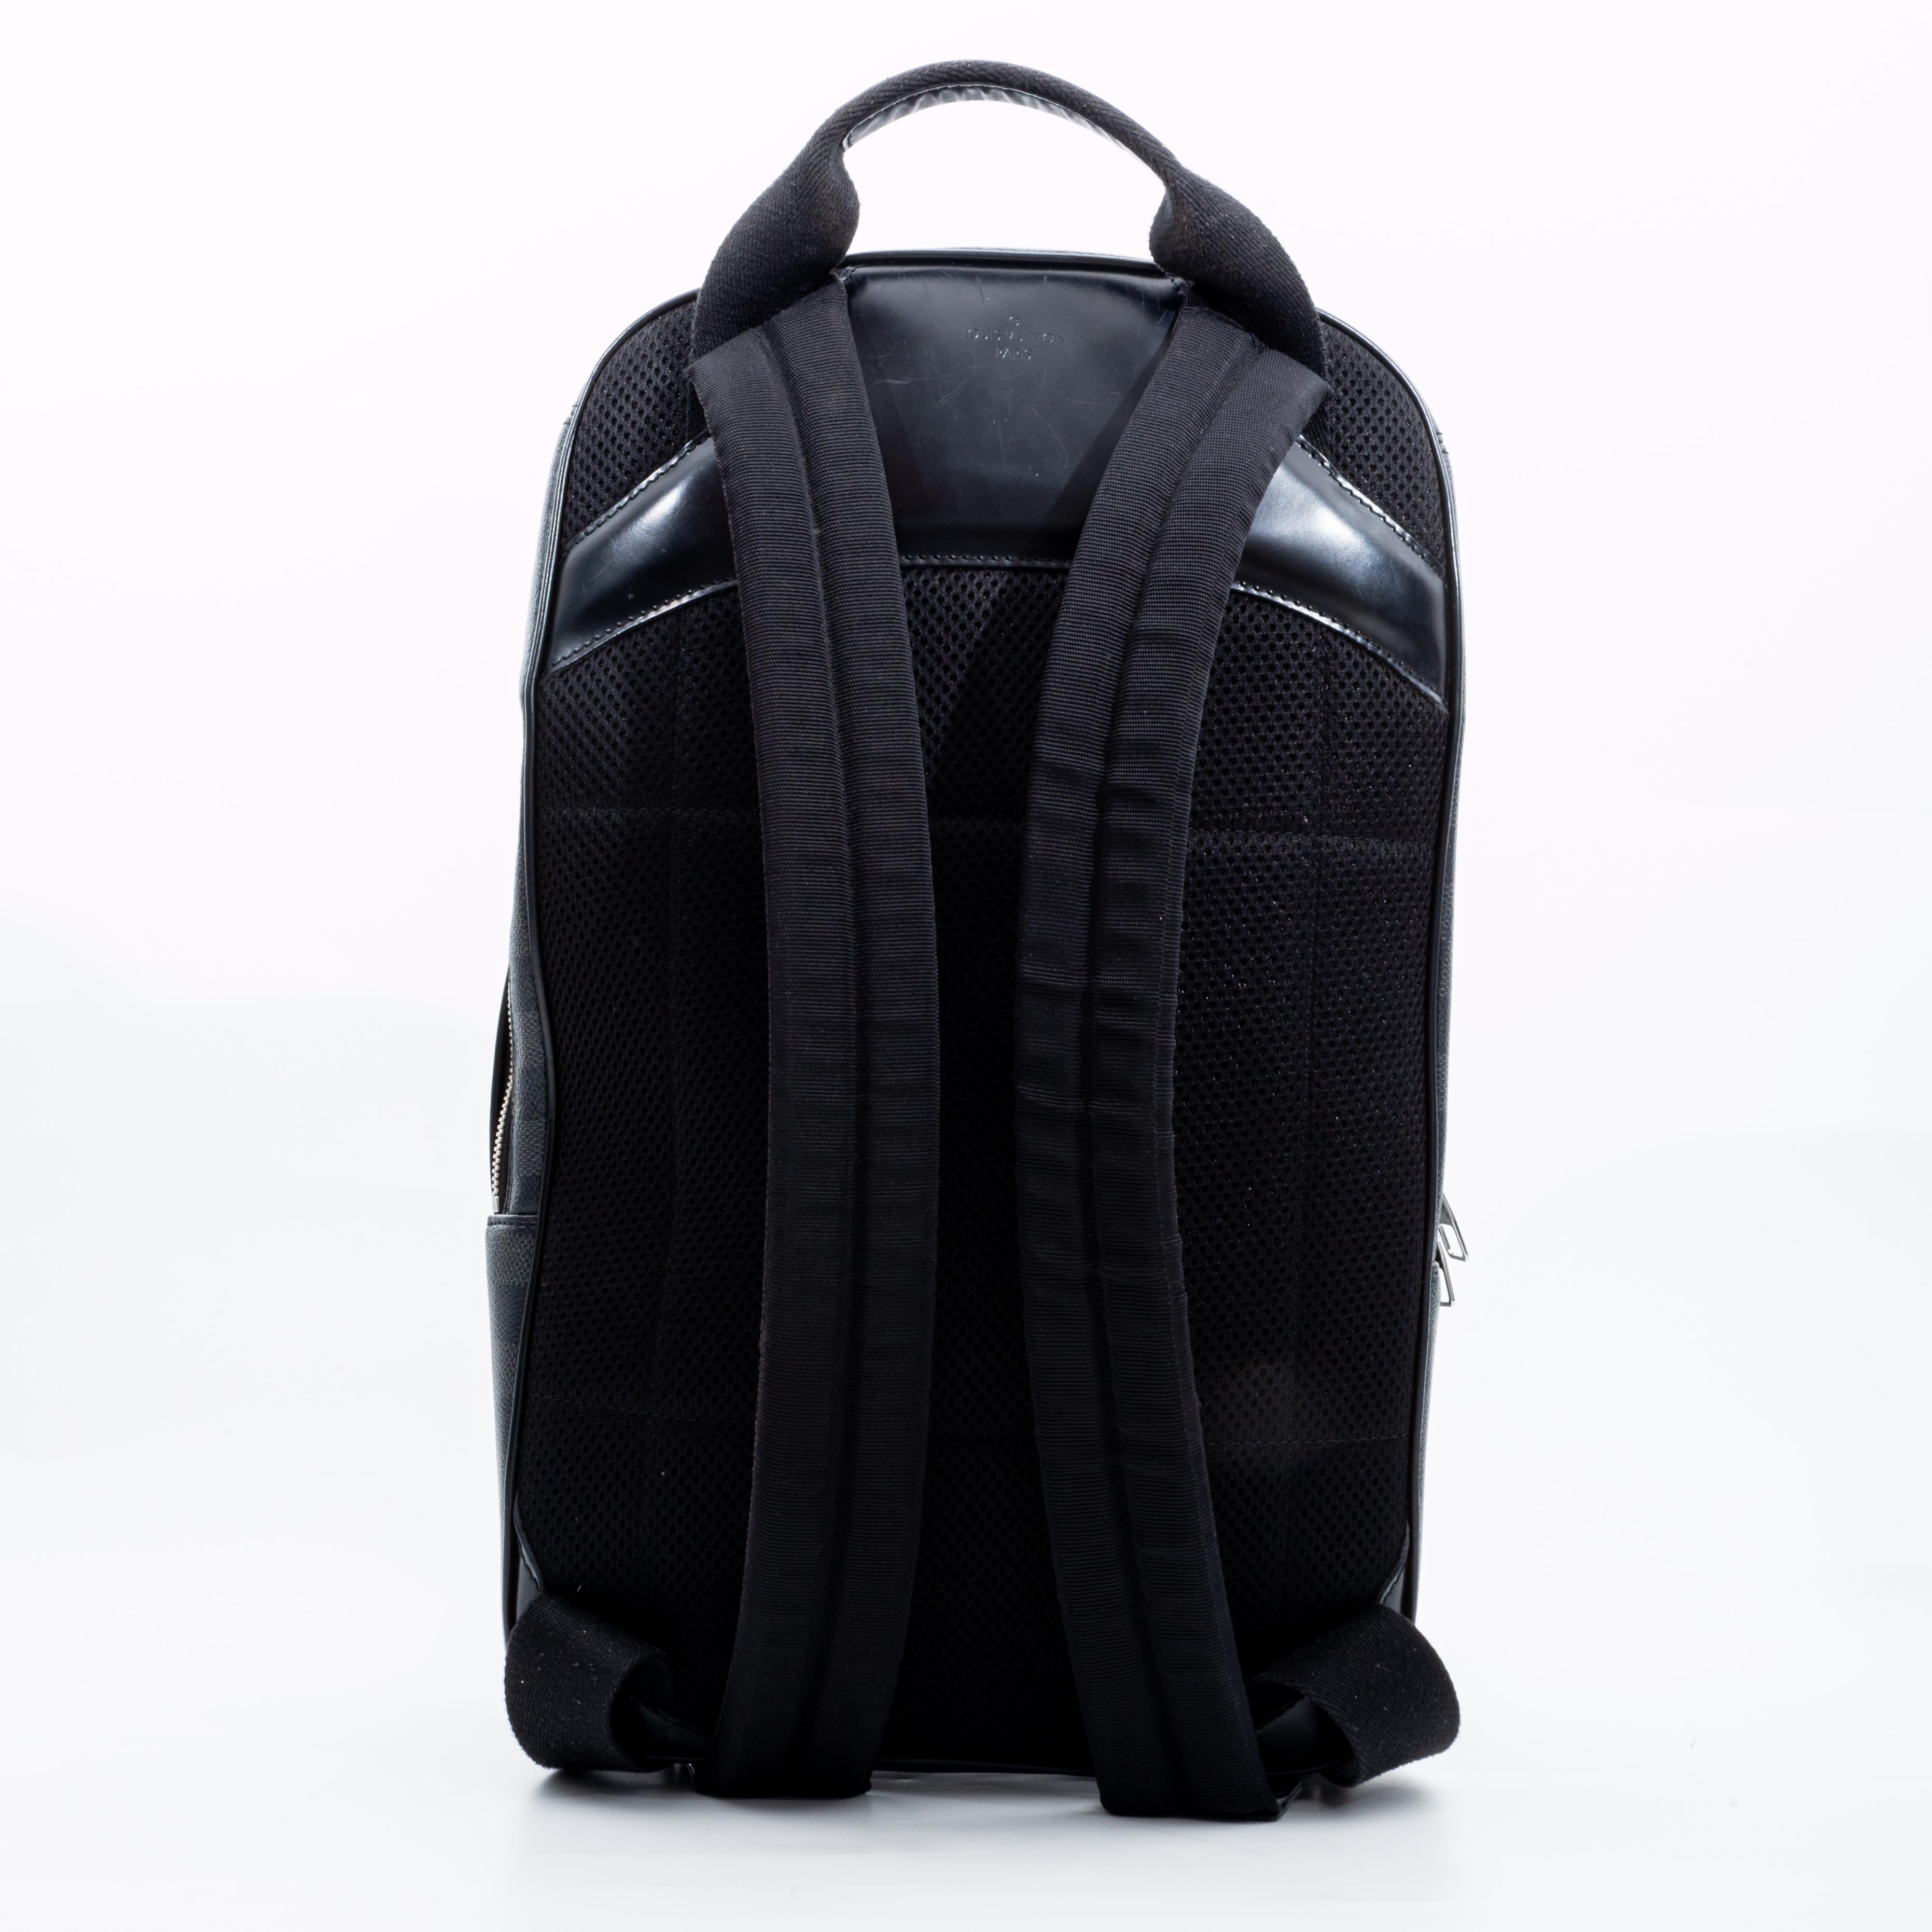 The Michael backpack is a sleek, modern design in Damier Graphite canvas with black leather trim. Geared to active lifestyles, it can be carried in the hand or on the shoulder. Its main compartment features a secure and convenient double zip closure